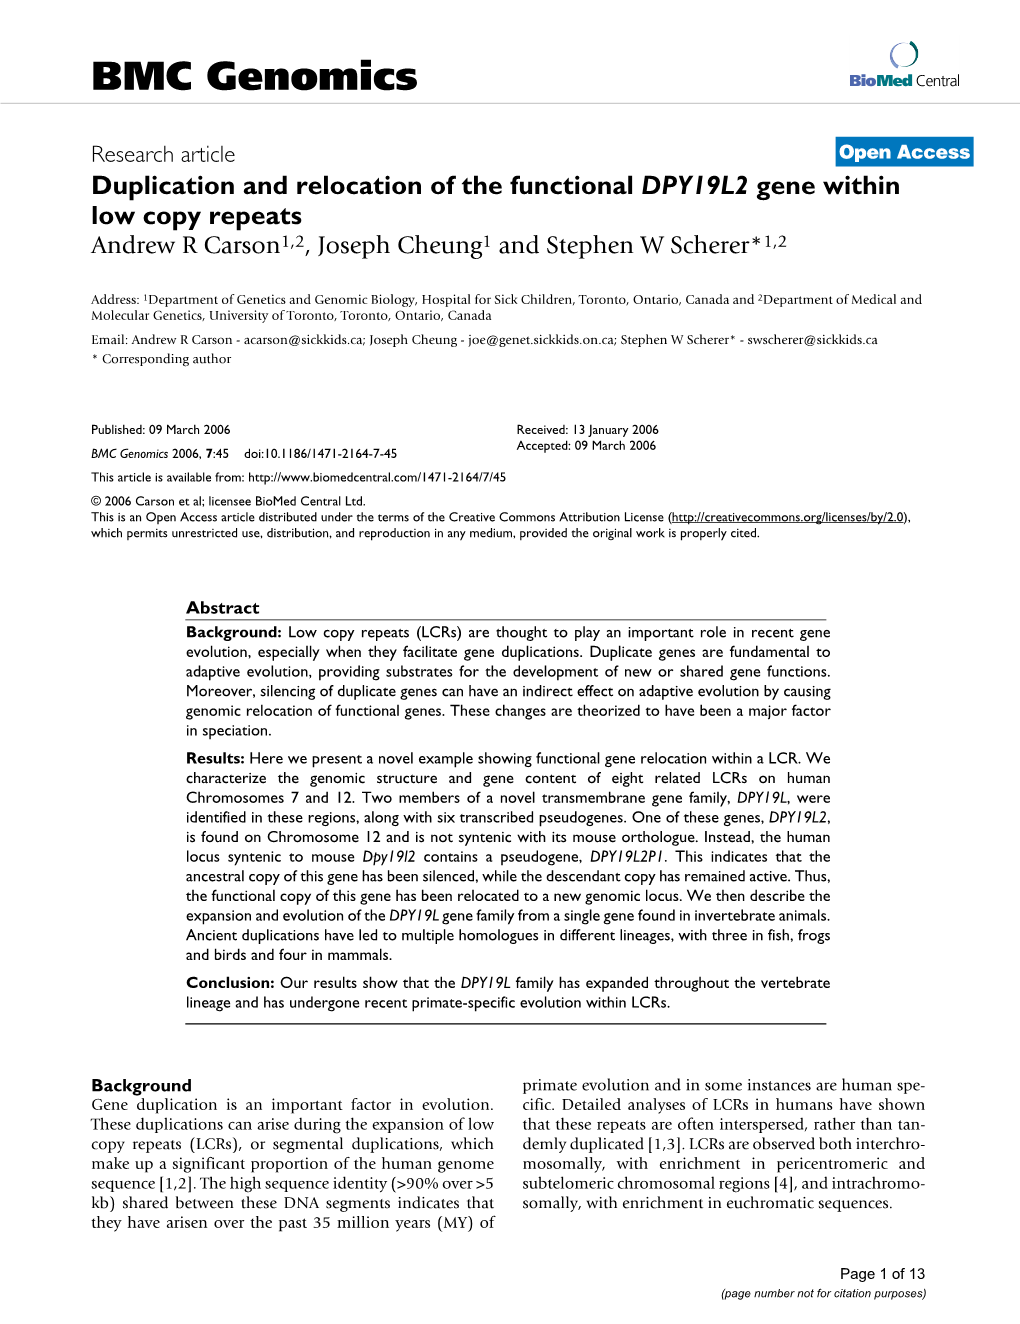 Duplication and Relocation of the Functional DPY19L2 Gene Within Low Copy Repeats Andrew R Carson1,2, Joseph Cheung1 and Stephen W Scherer*1,2